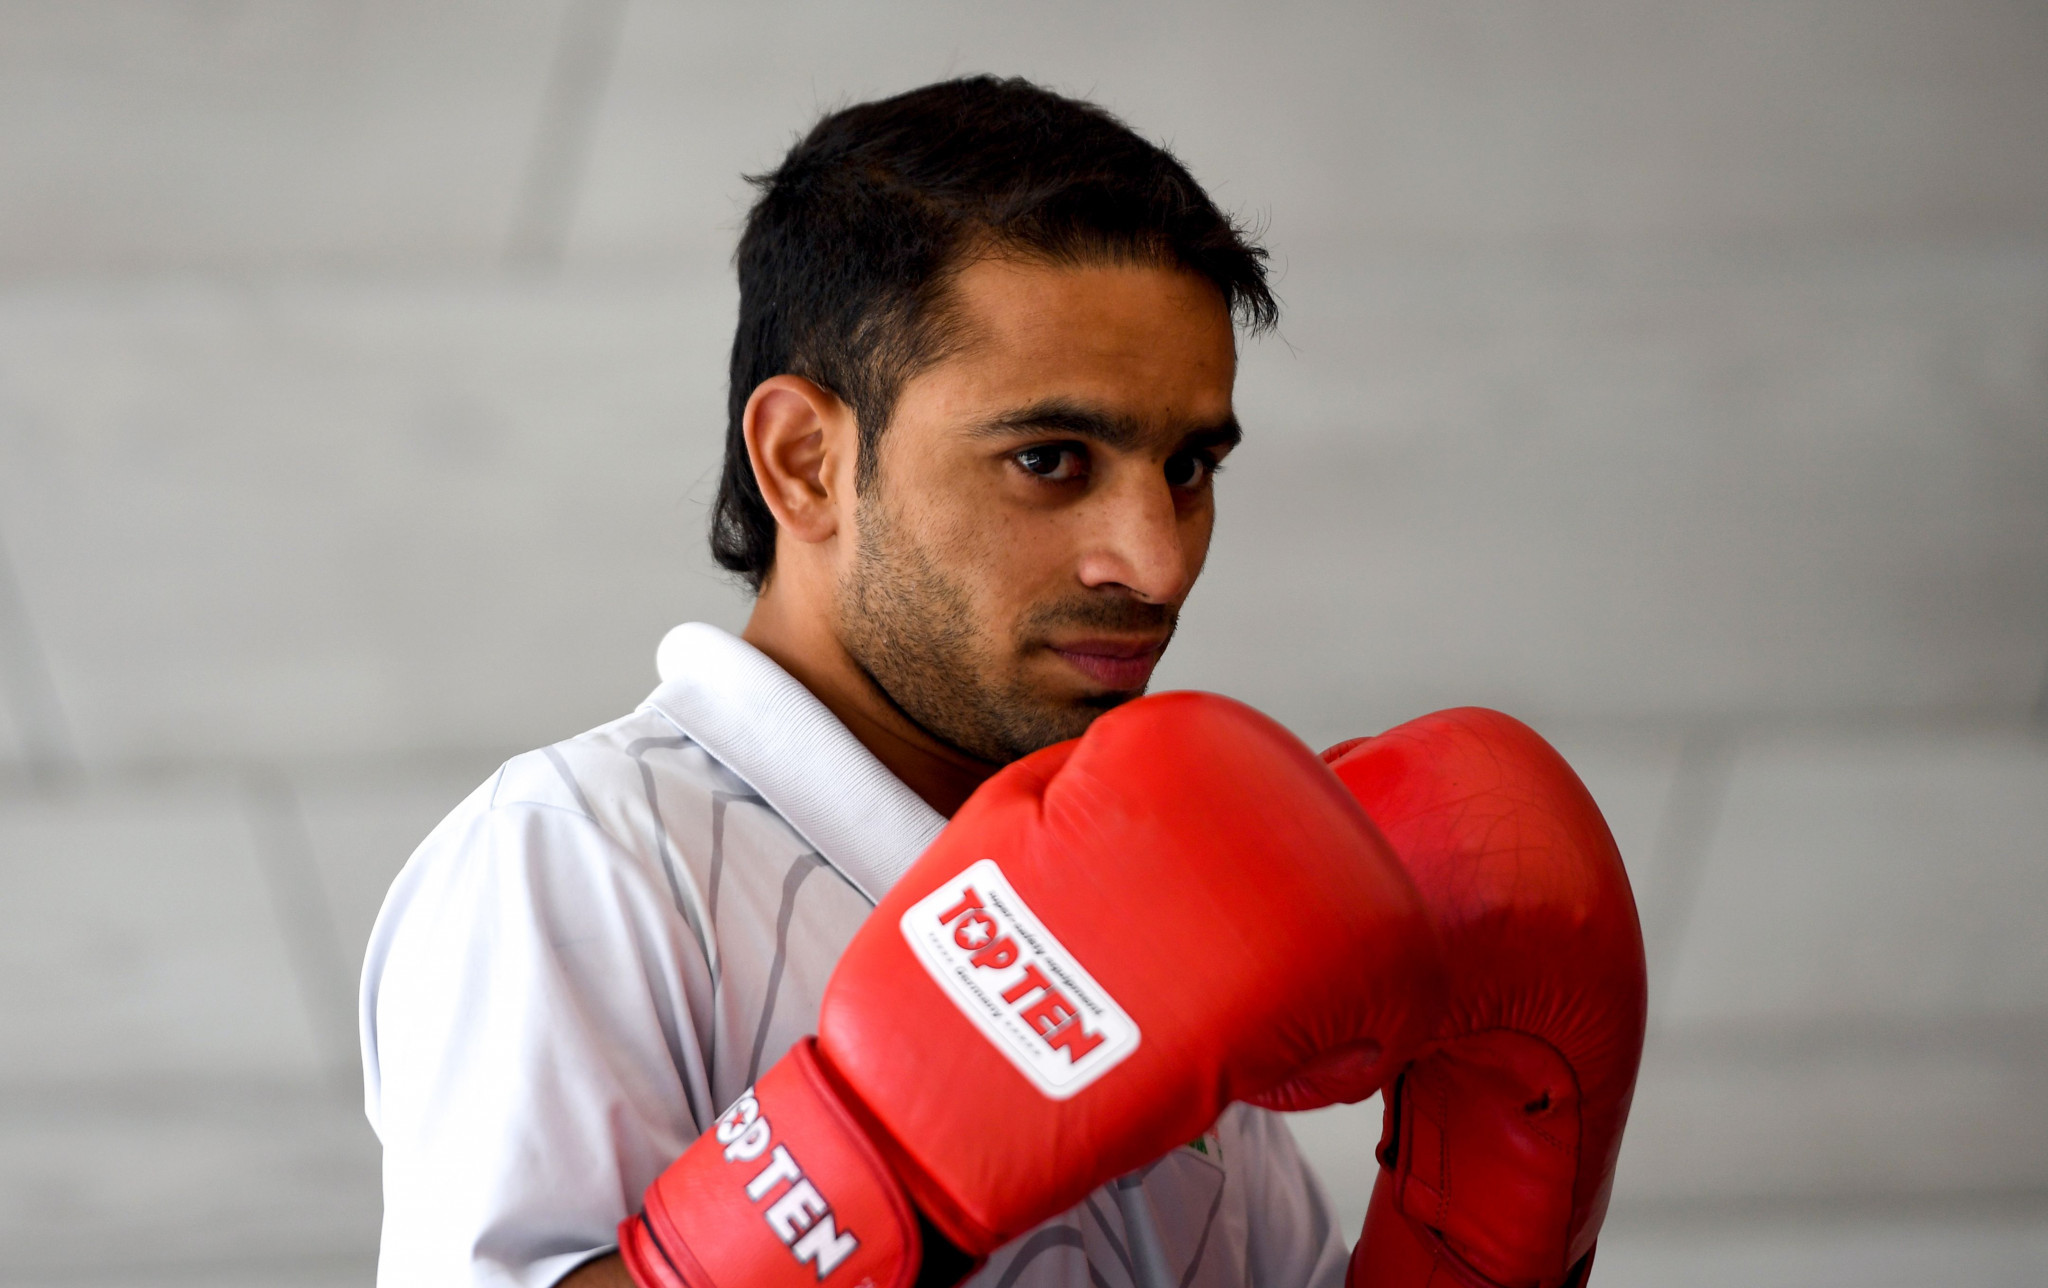 Amit Panghal is among the boxers to have been nominated for teh Rajiv Gandhi Khel Ratna Award ©Getty Images